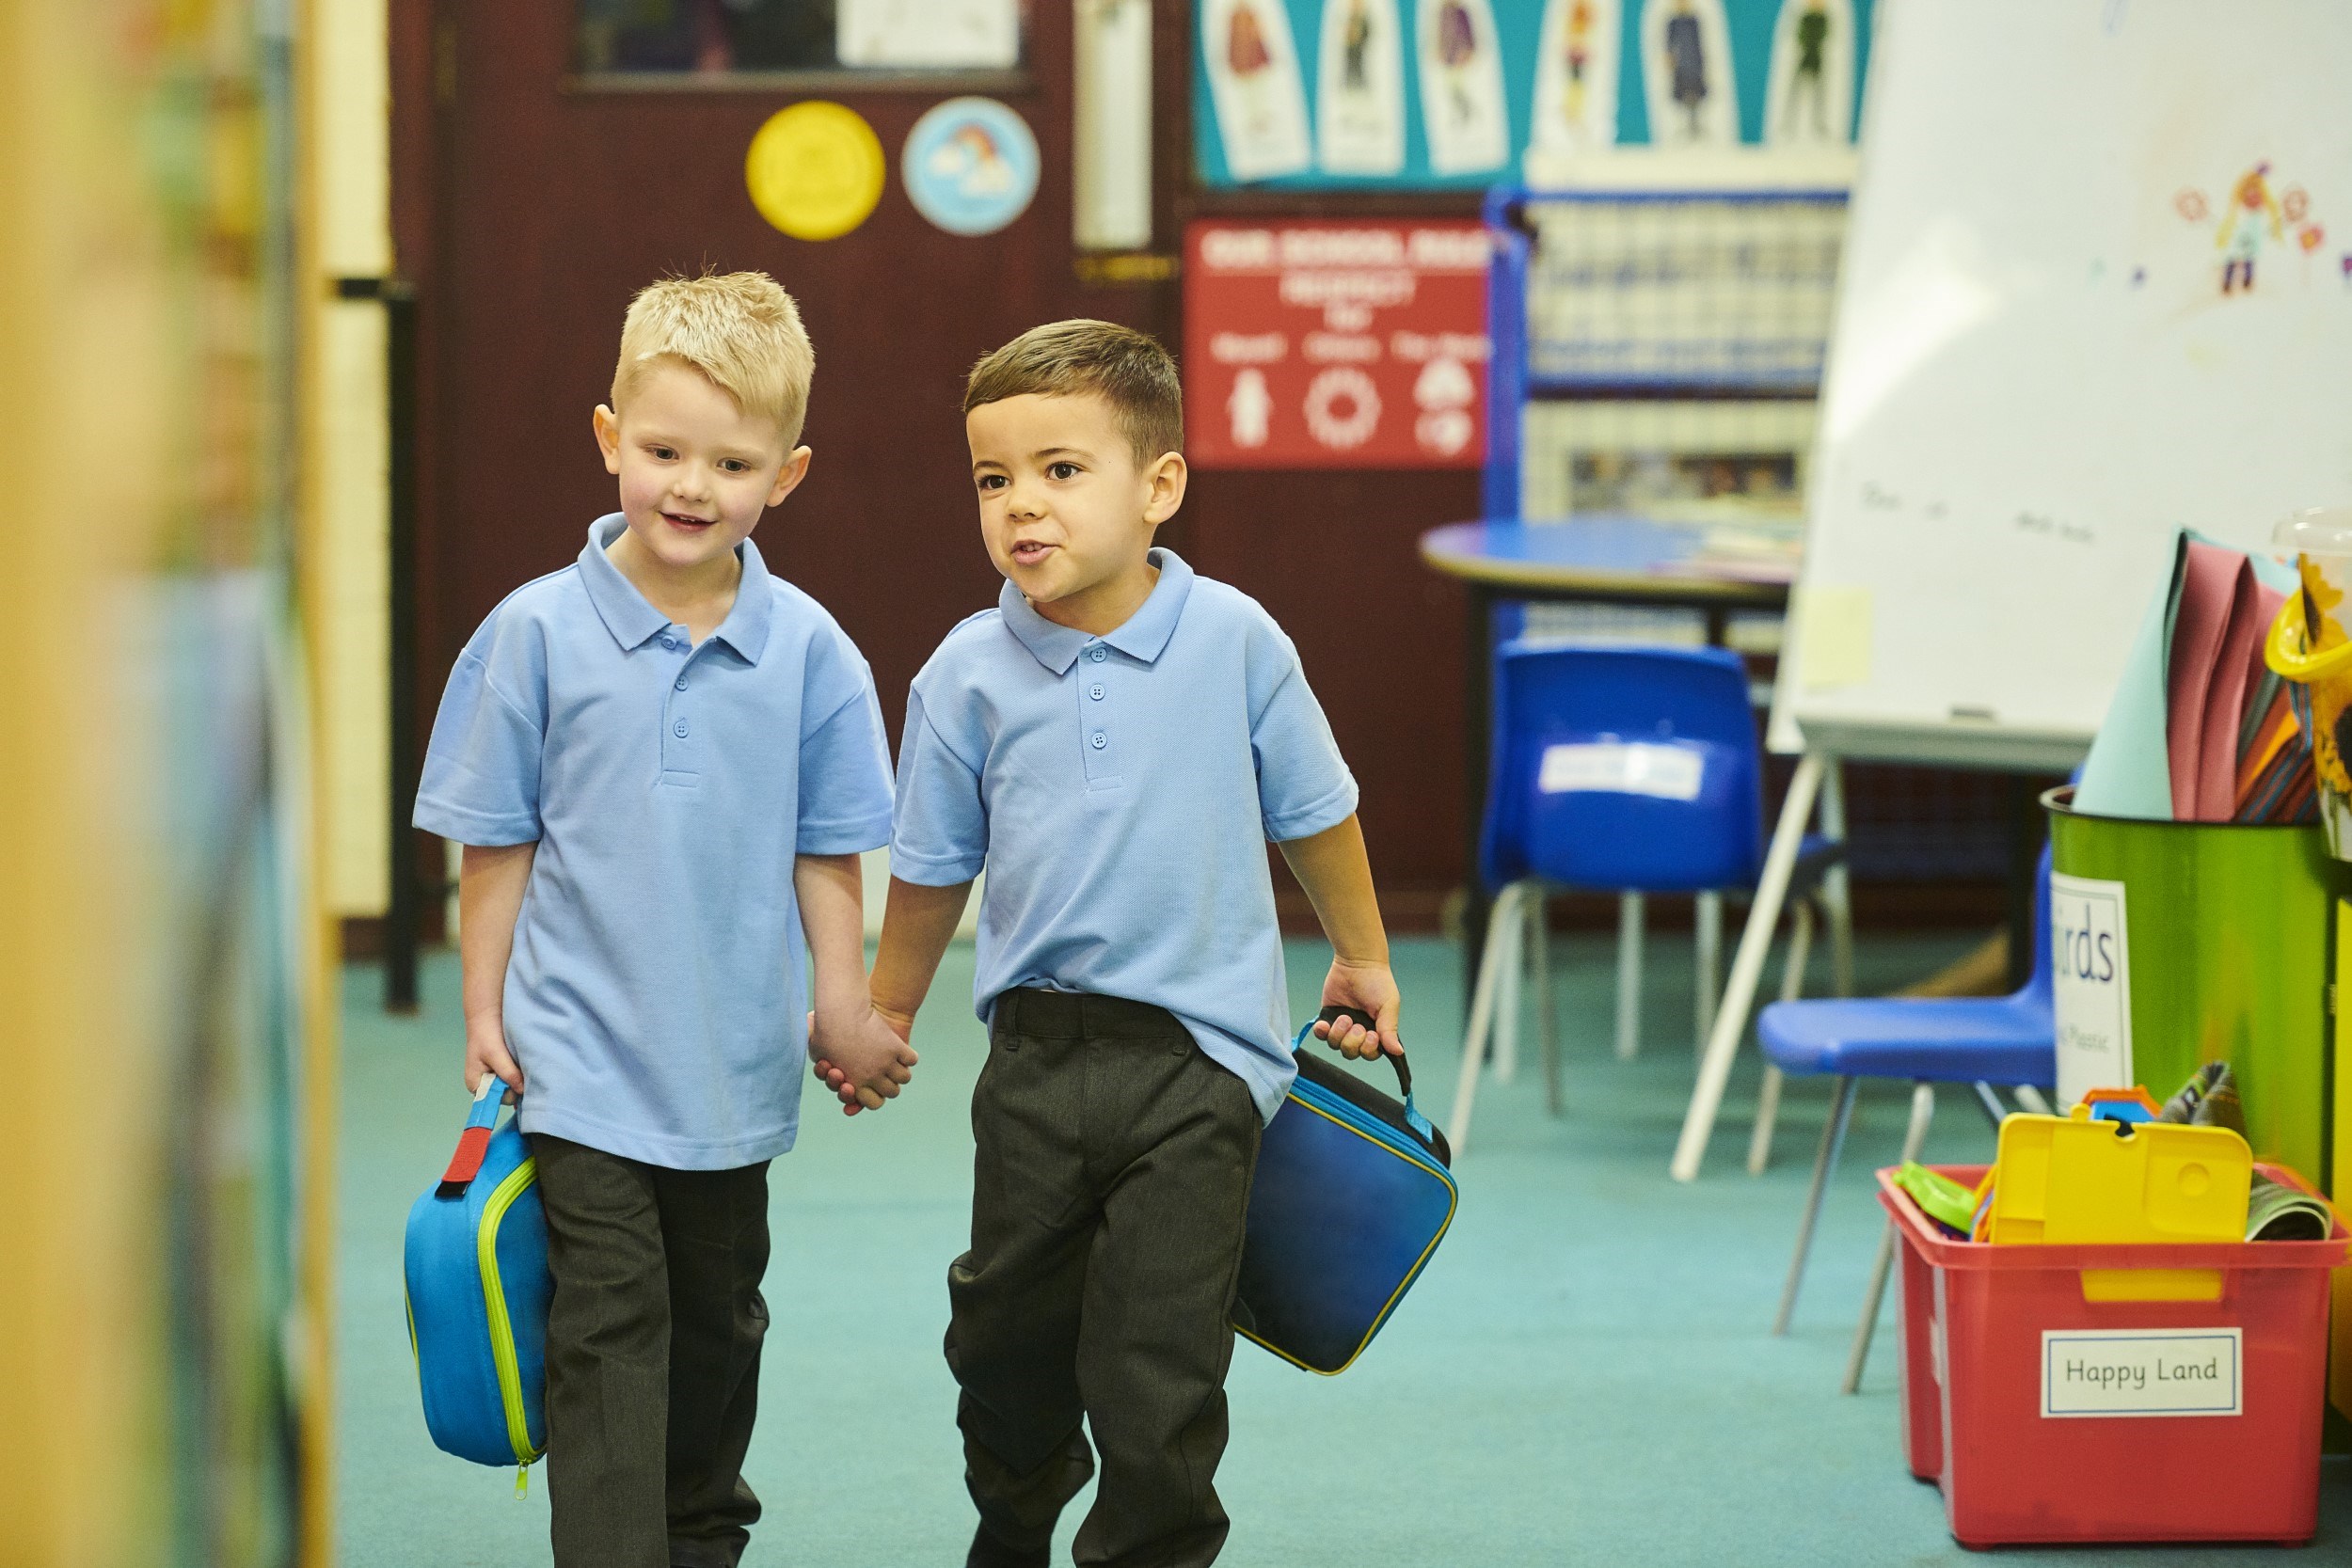 Two children holding hands and their bags walking through a classroom